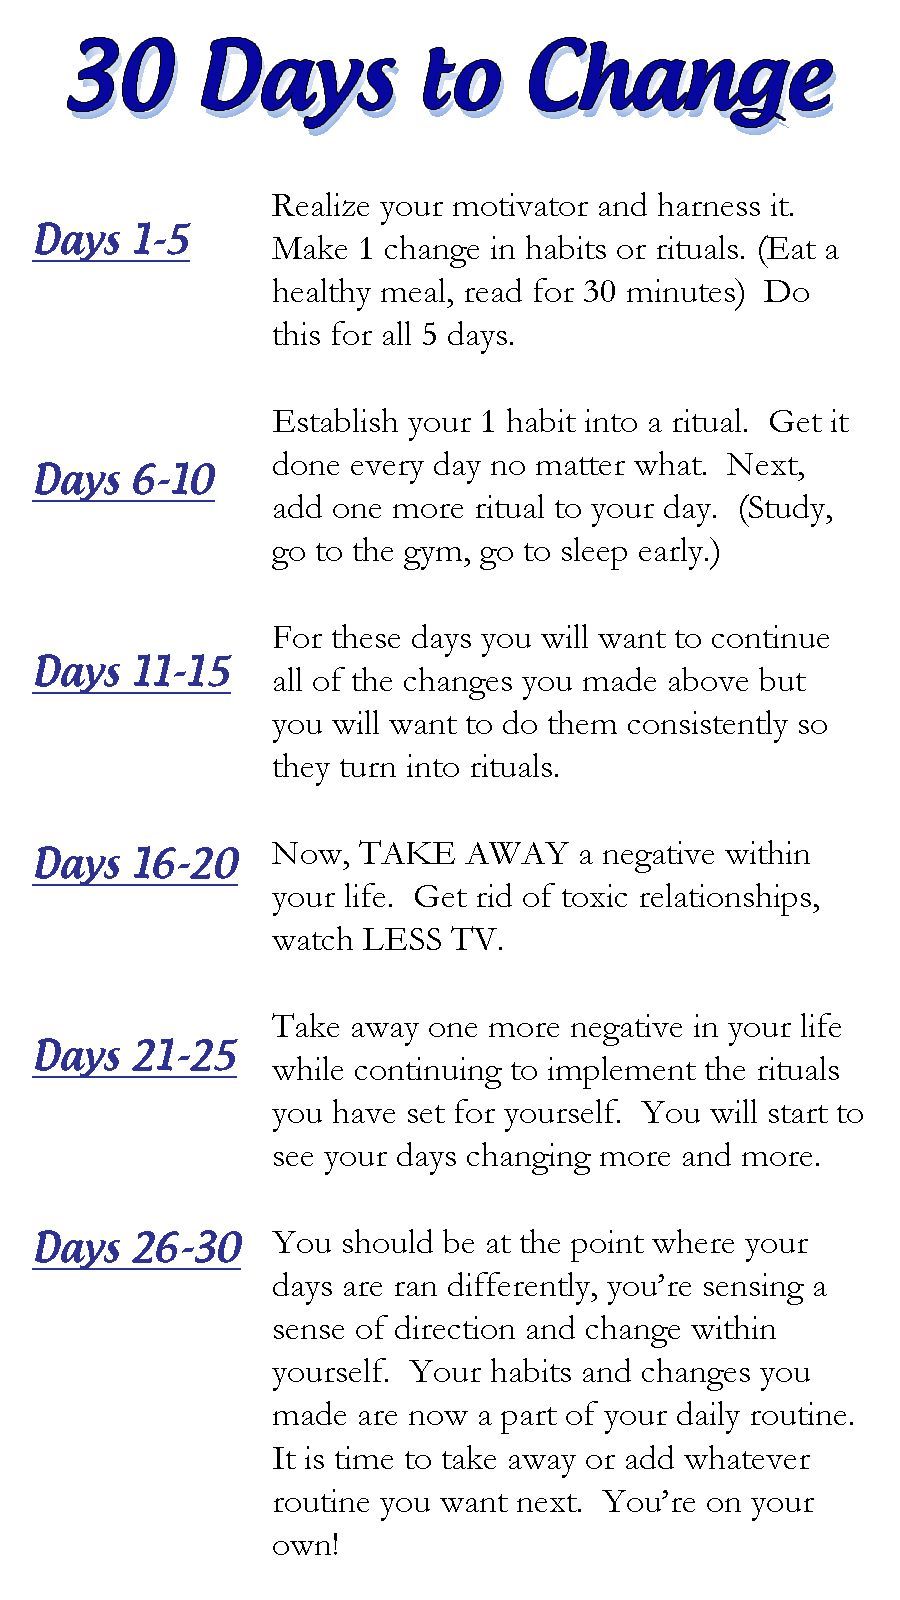 How to turn your life around in 30 days.